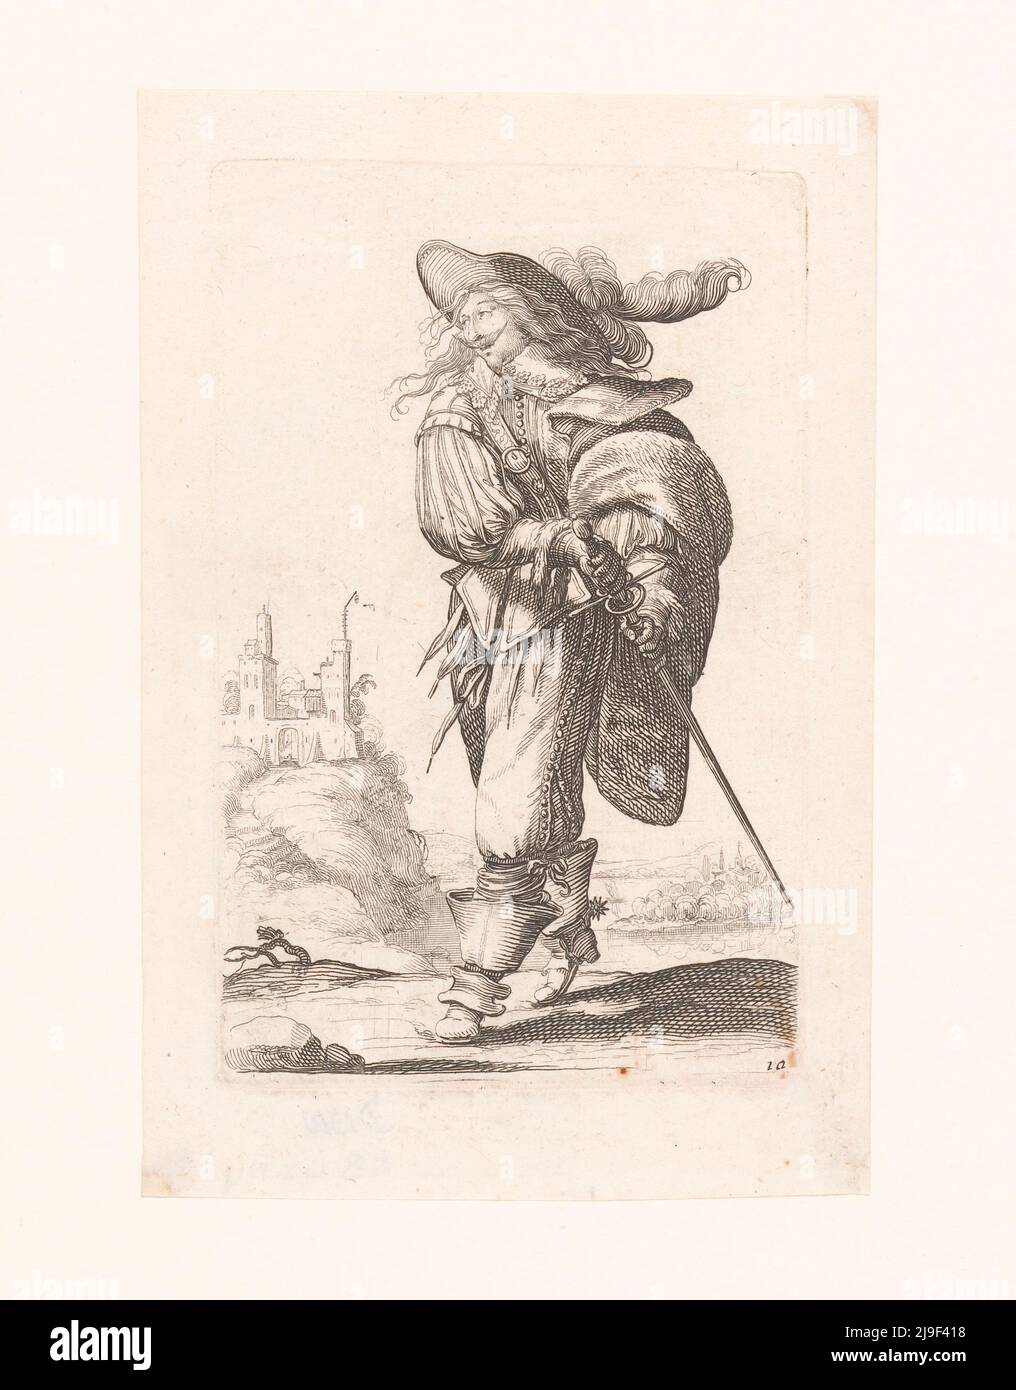 French nobleman, drawing his sword, dressed according to the fashion of ca. 1629. By Abraham Bosse, 1629 Stock Photo